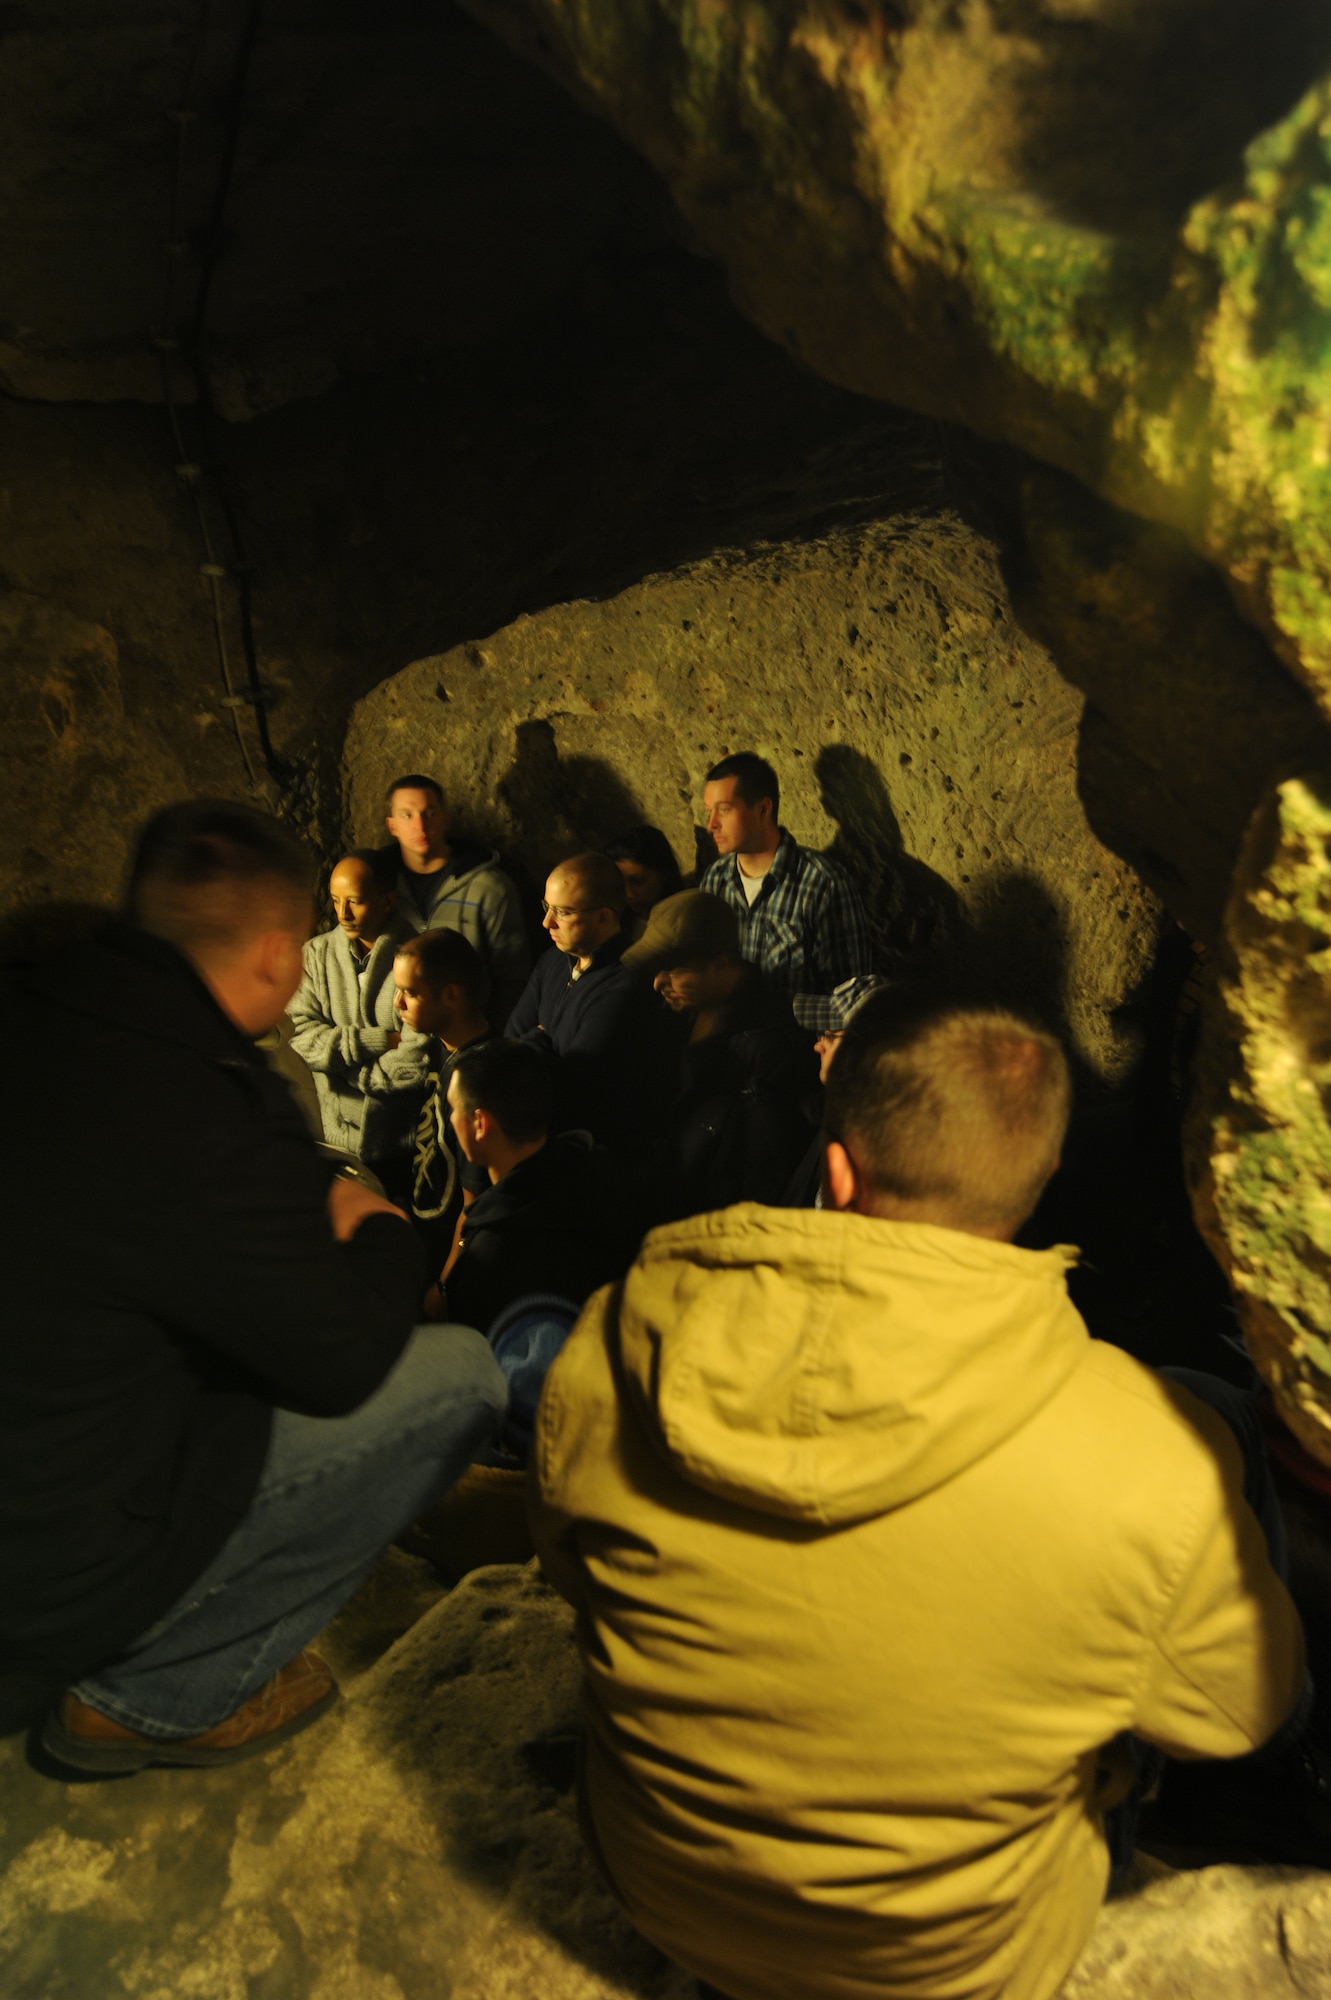 DERINKUYU, Turkey – Airmen from Spangdahlem Air Base participating in Anatolian Falcon 2012 tour an underground city in the Cappadocia region of Turkey, March 10. Airmen participating in Exercise Anatolian Falcon 2012 were given the opportunity to tour Cappadocia to boost morale and experience the culture of the host nation. (U.S. Air Force photo/Staff Sgt. Benjamin Wilson)